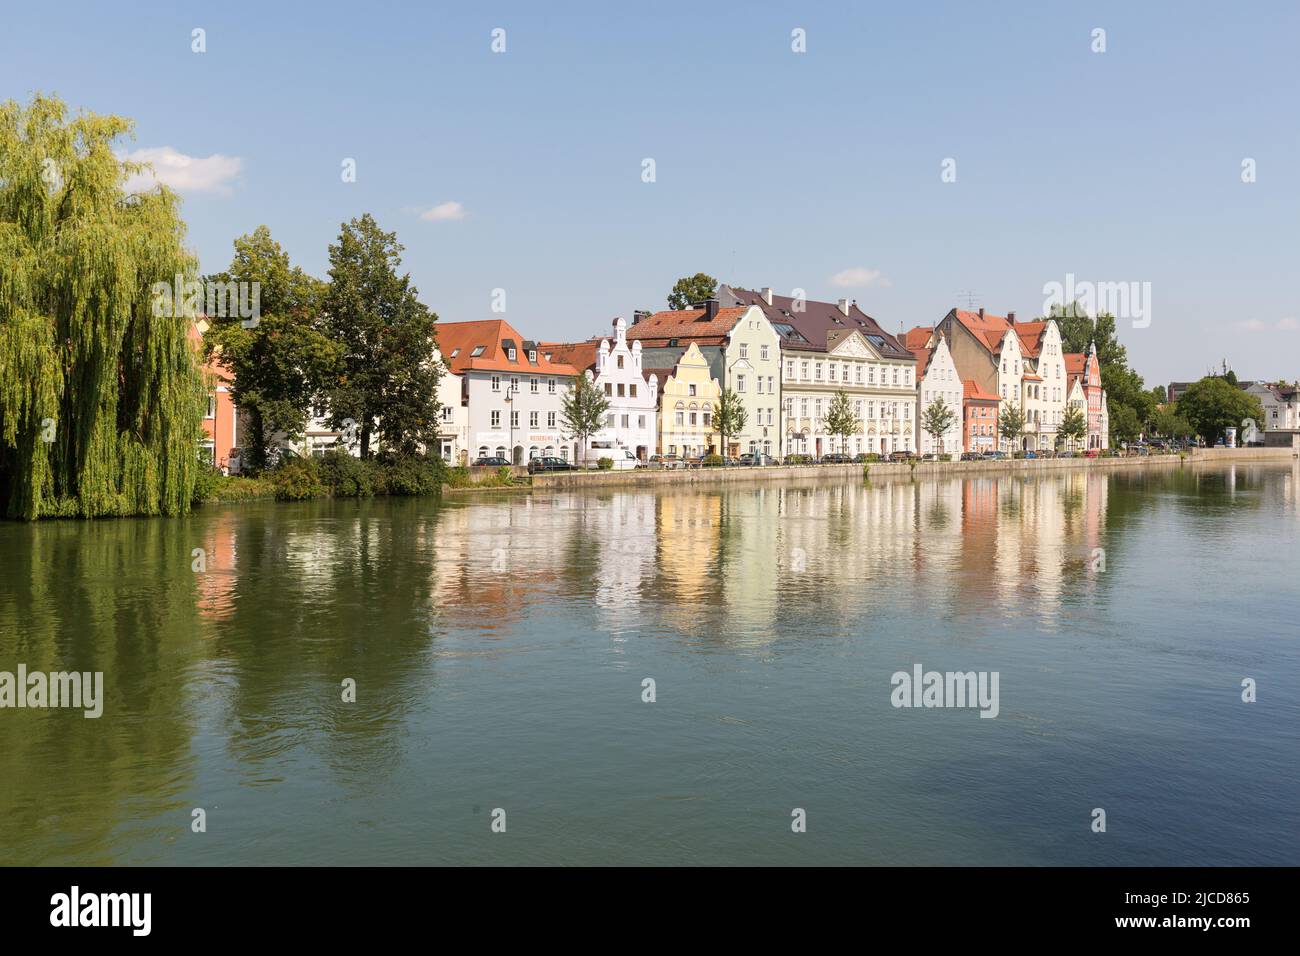 Landshut, Germany - Aug 15, 2021: Historical houses with colorful facades at the river banks of the Isar. Stock Photo